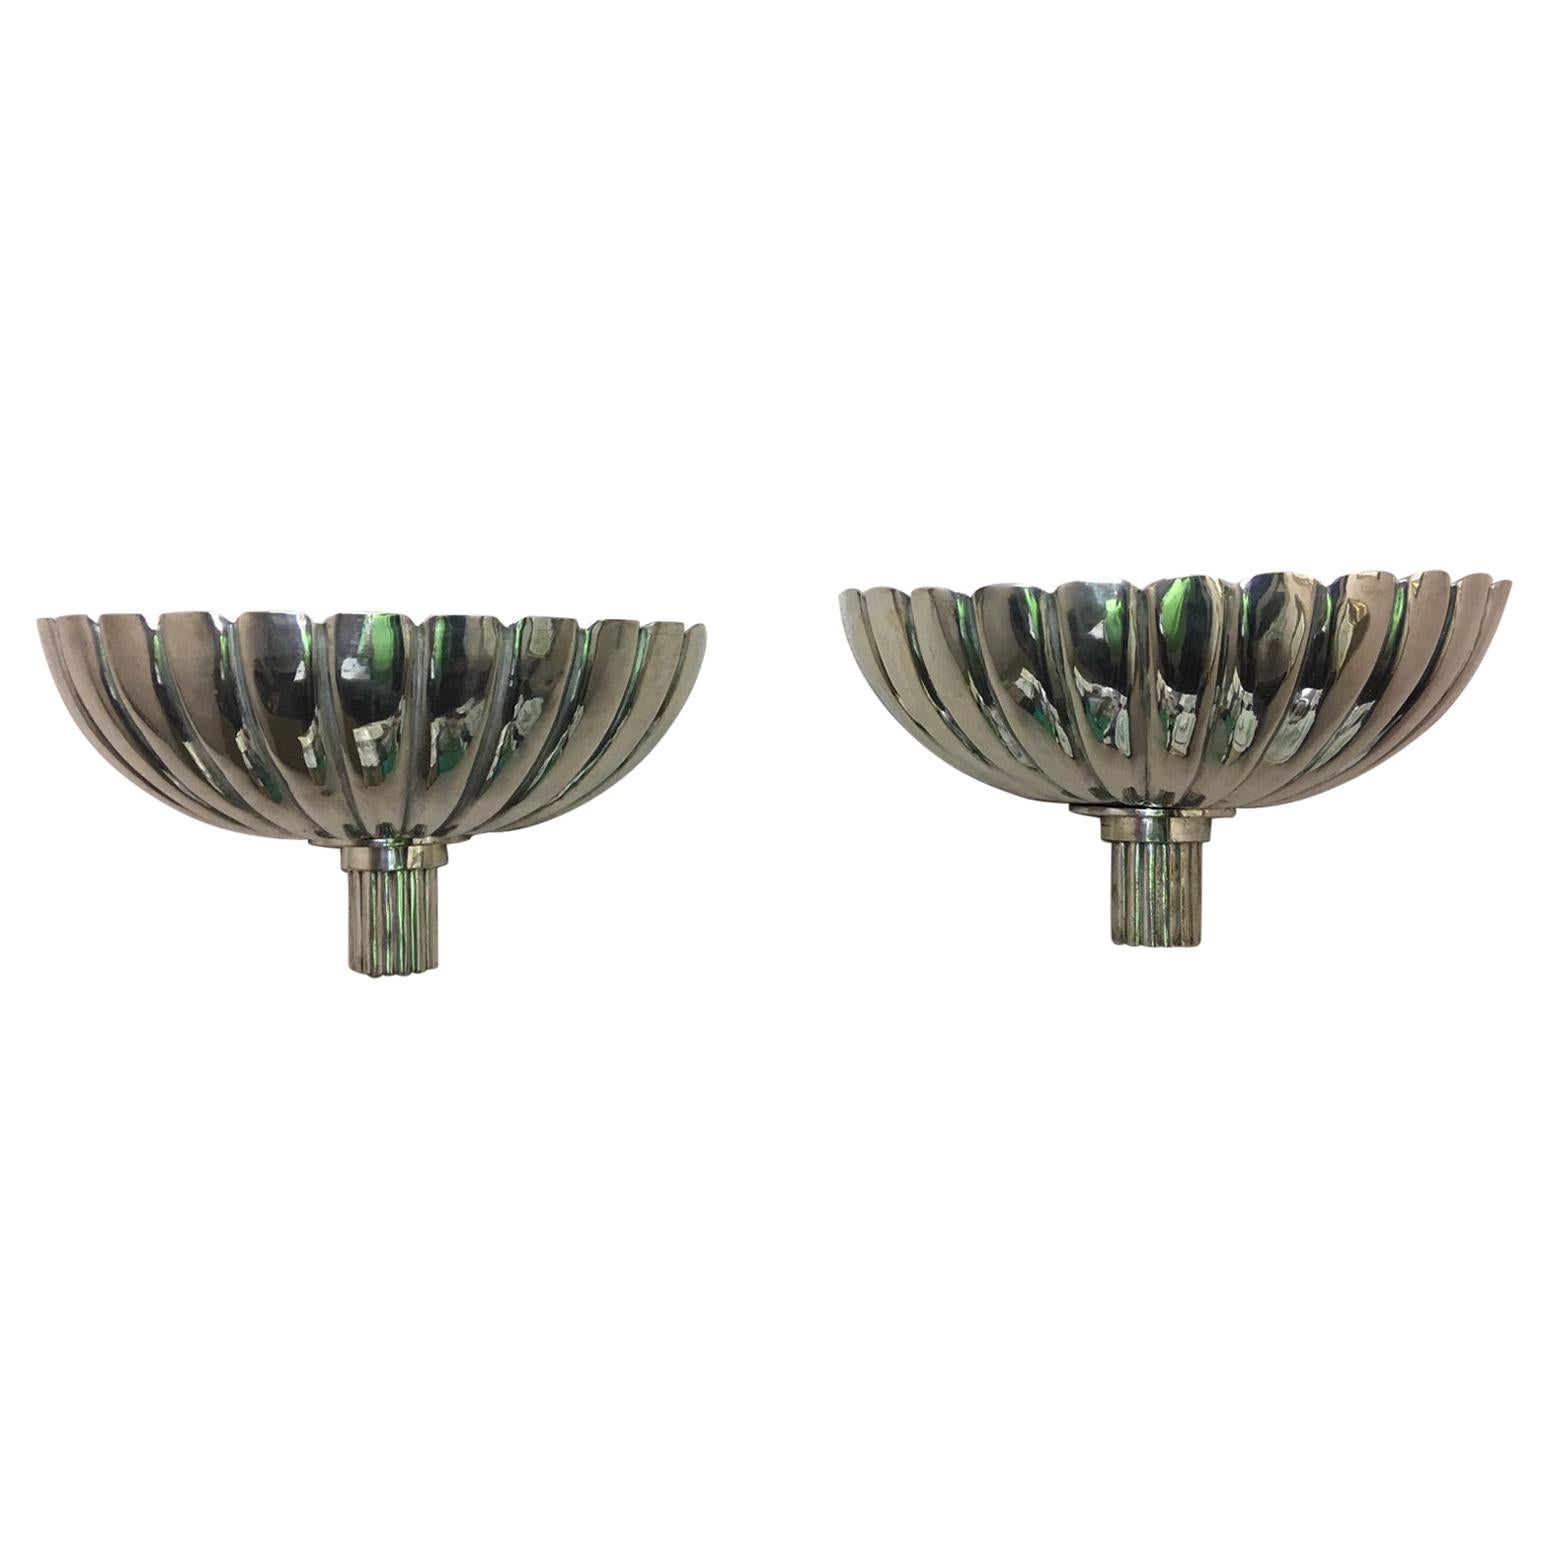 Pair of French Art Deco Silver Wall Sconces, Mid-20th Century